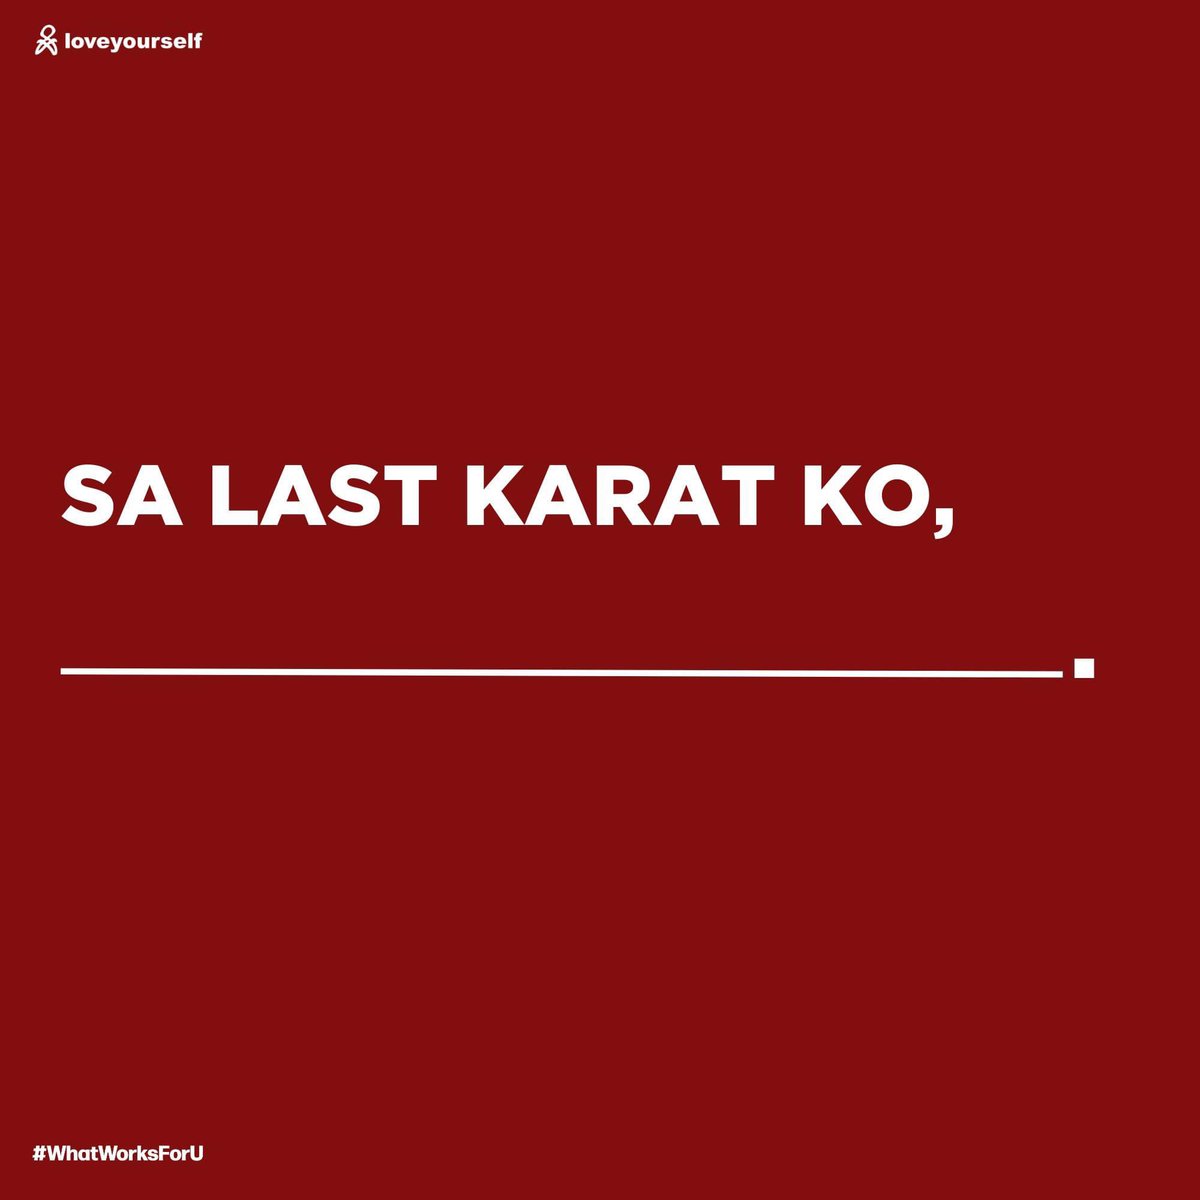 Sa last karat ko, you should know #WhatWorksForU and be responsible sa sexual health mo. PERIODT! 

#LoveYourselfPH